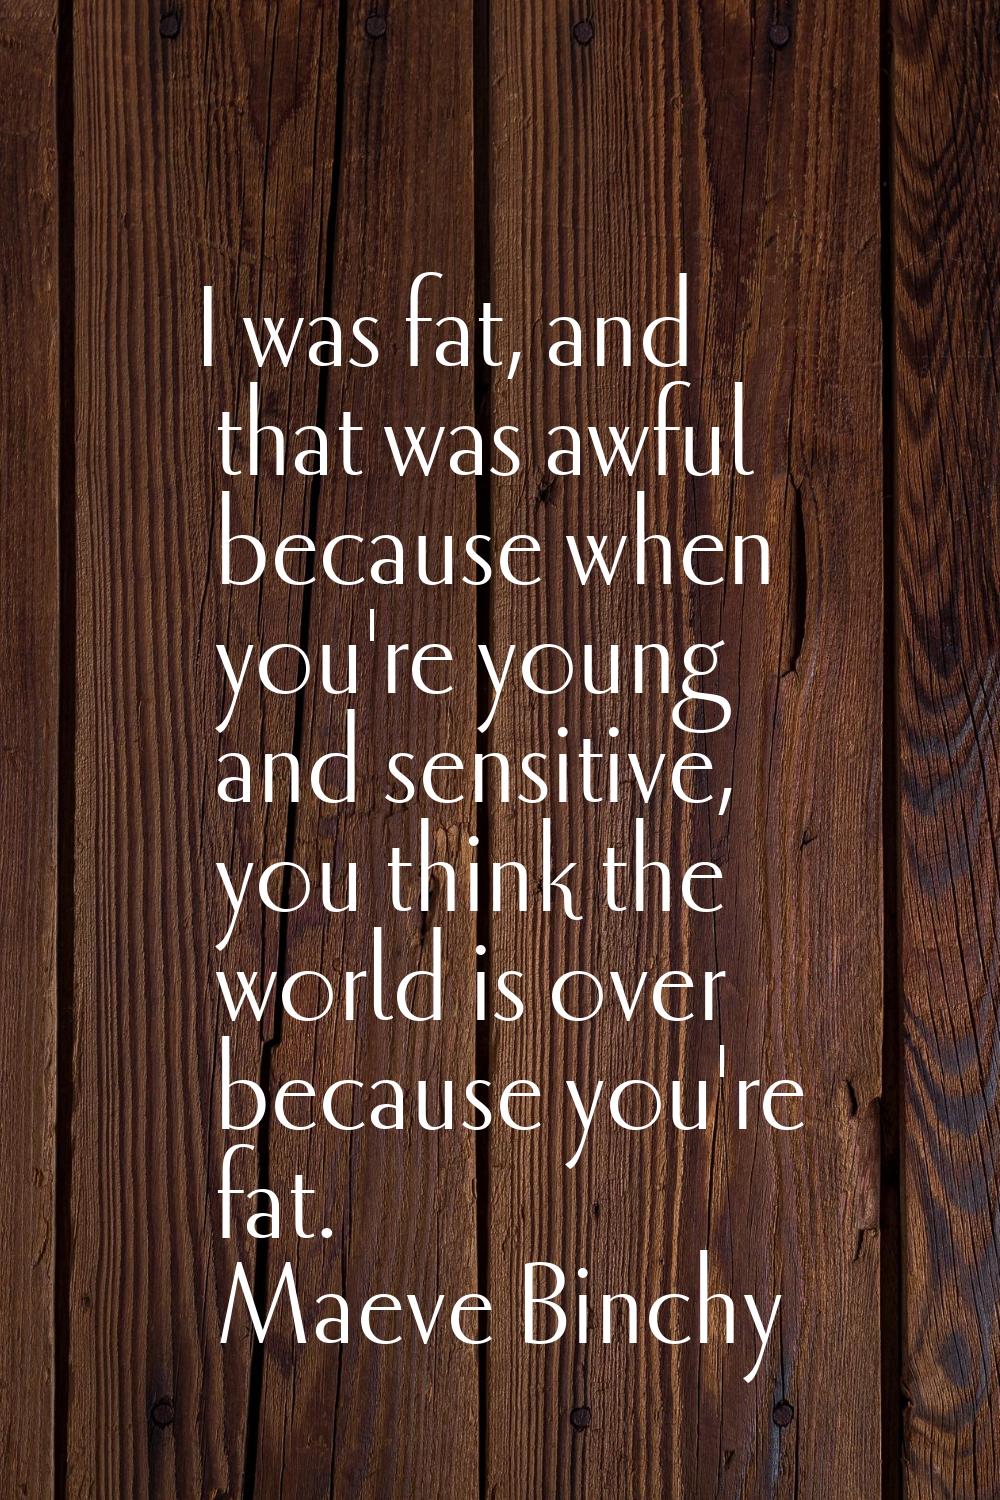 I was fat, and that was awful because when you're young and sensitive, you think the world is over 